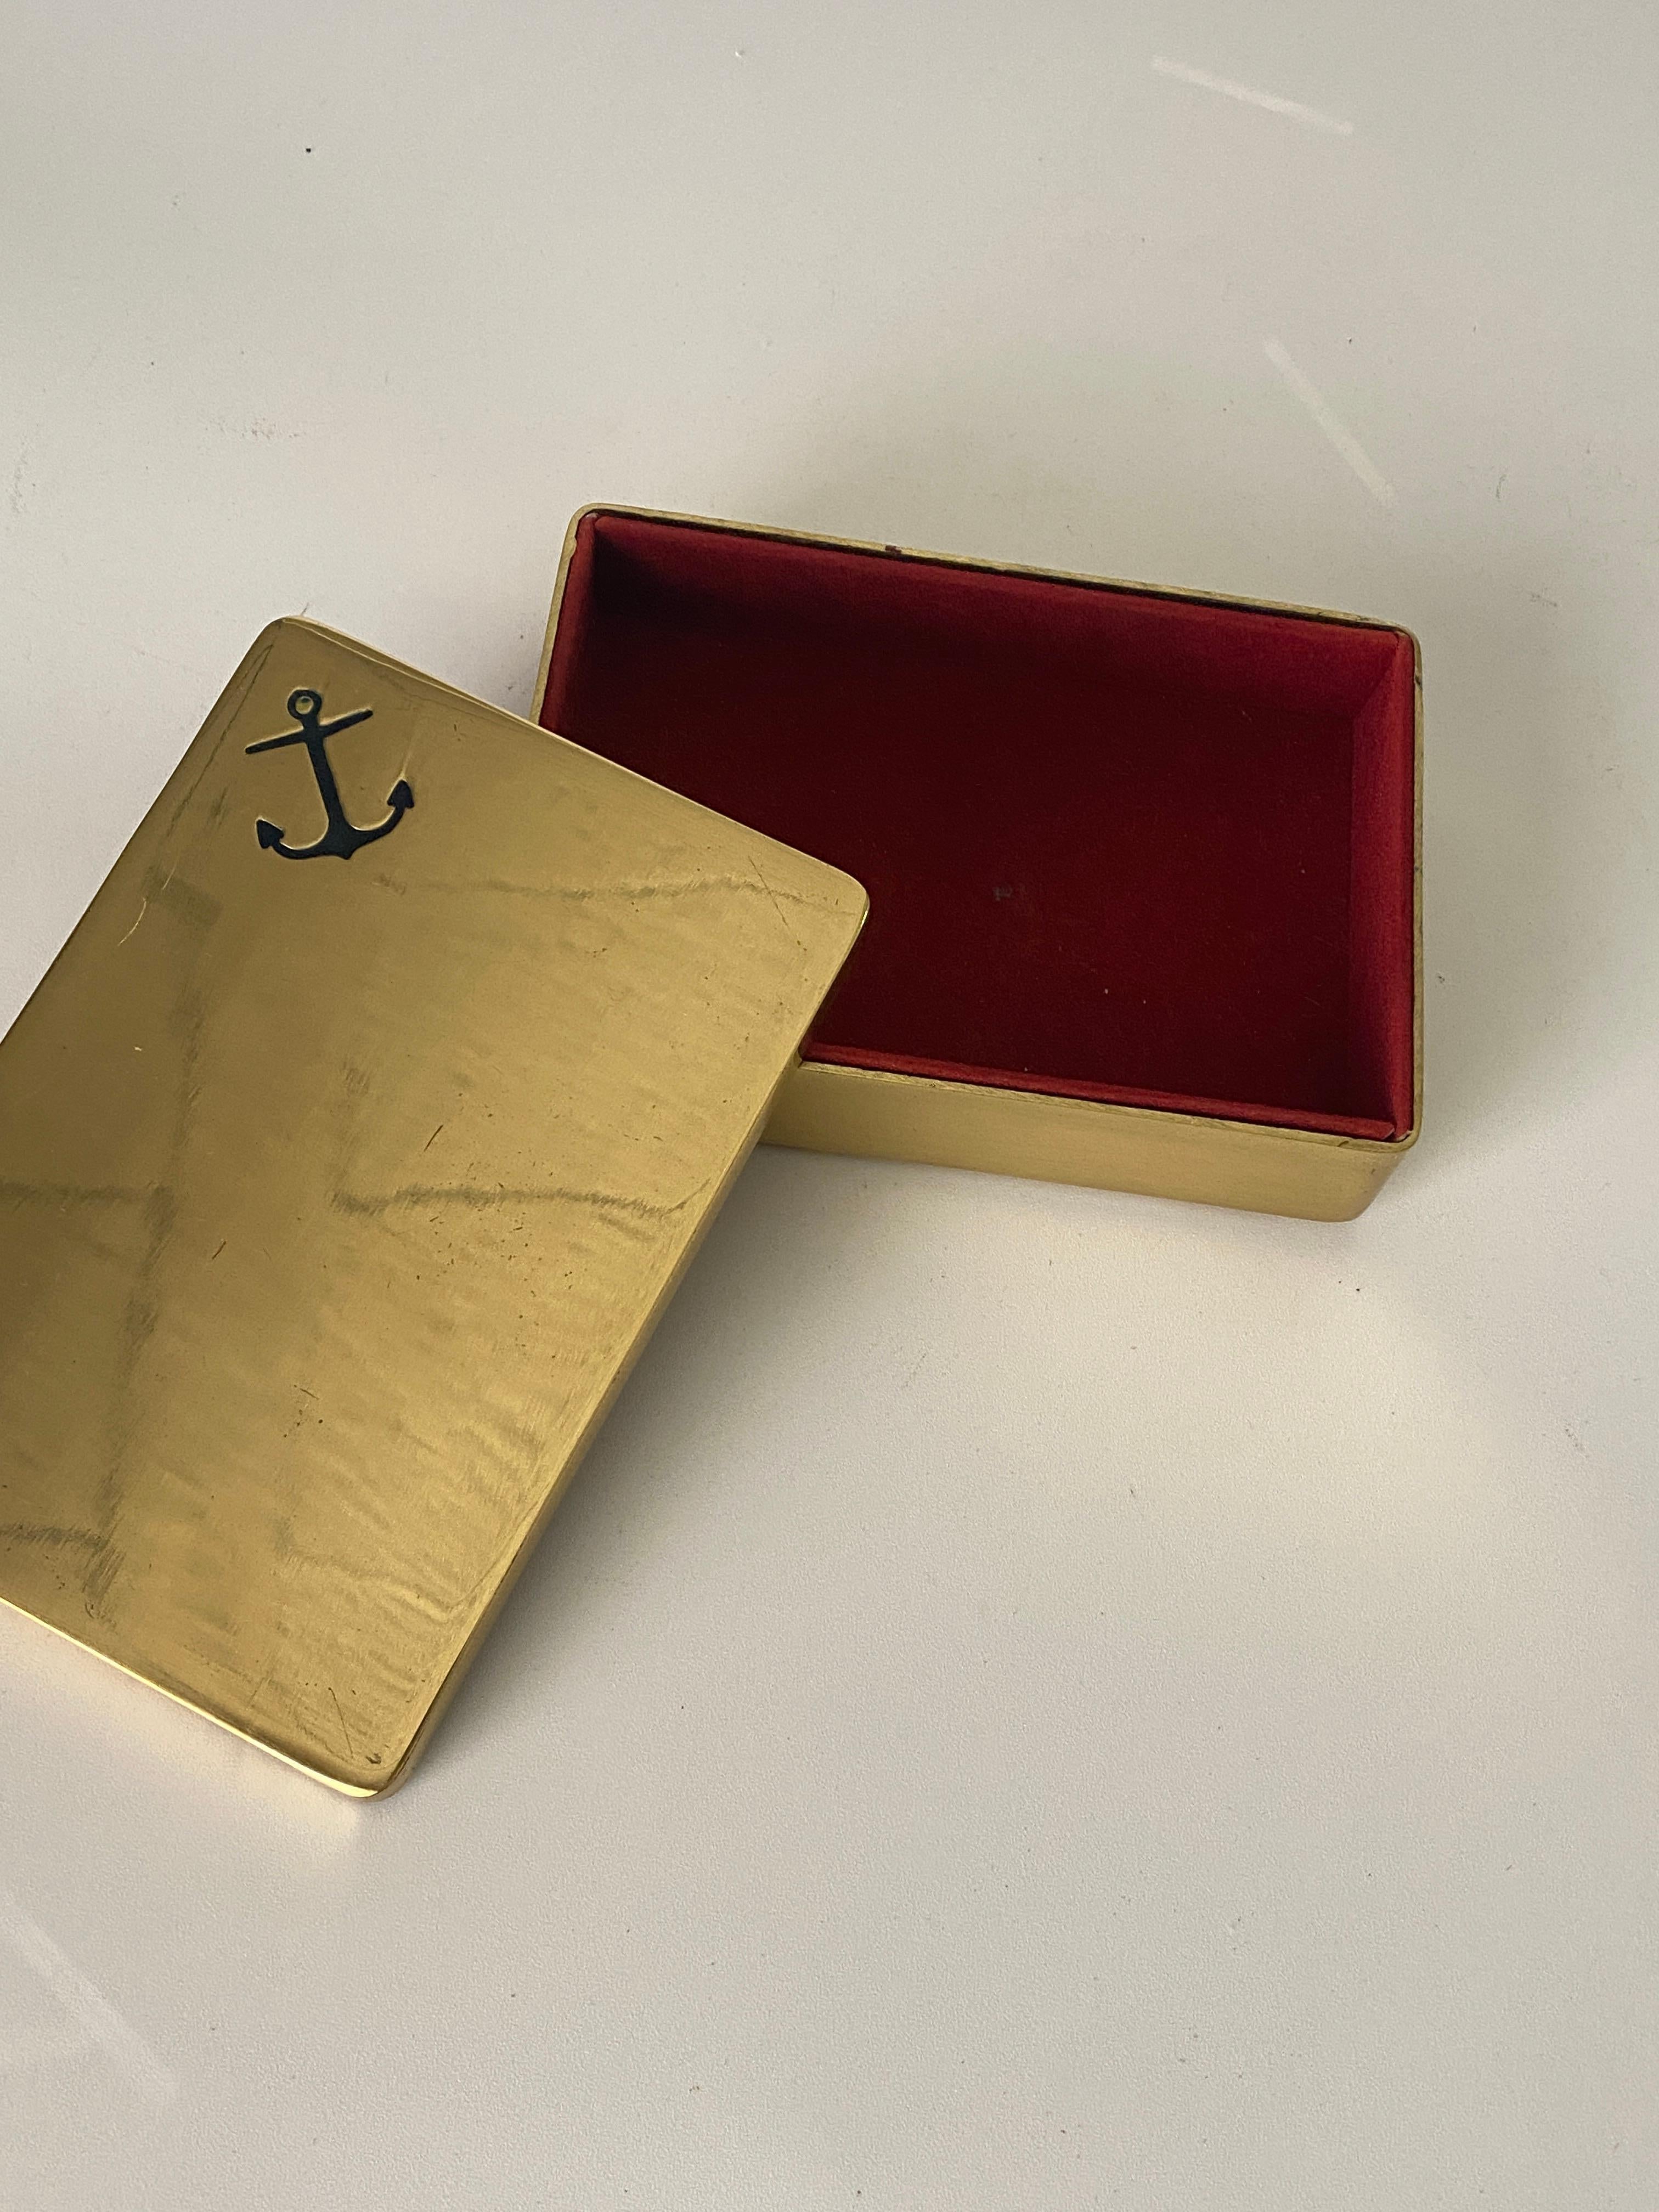 This box has been made in France, circa 1970. It is in a very good condition. The material is Brass, in a gold color, with an Anchor pattern. It is a rectangular Box with an old patina.